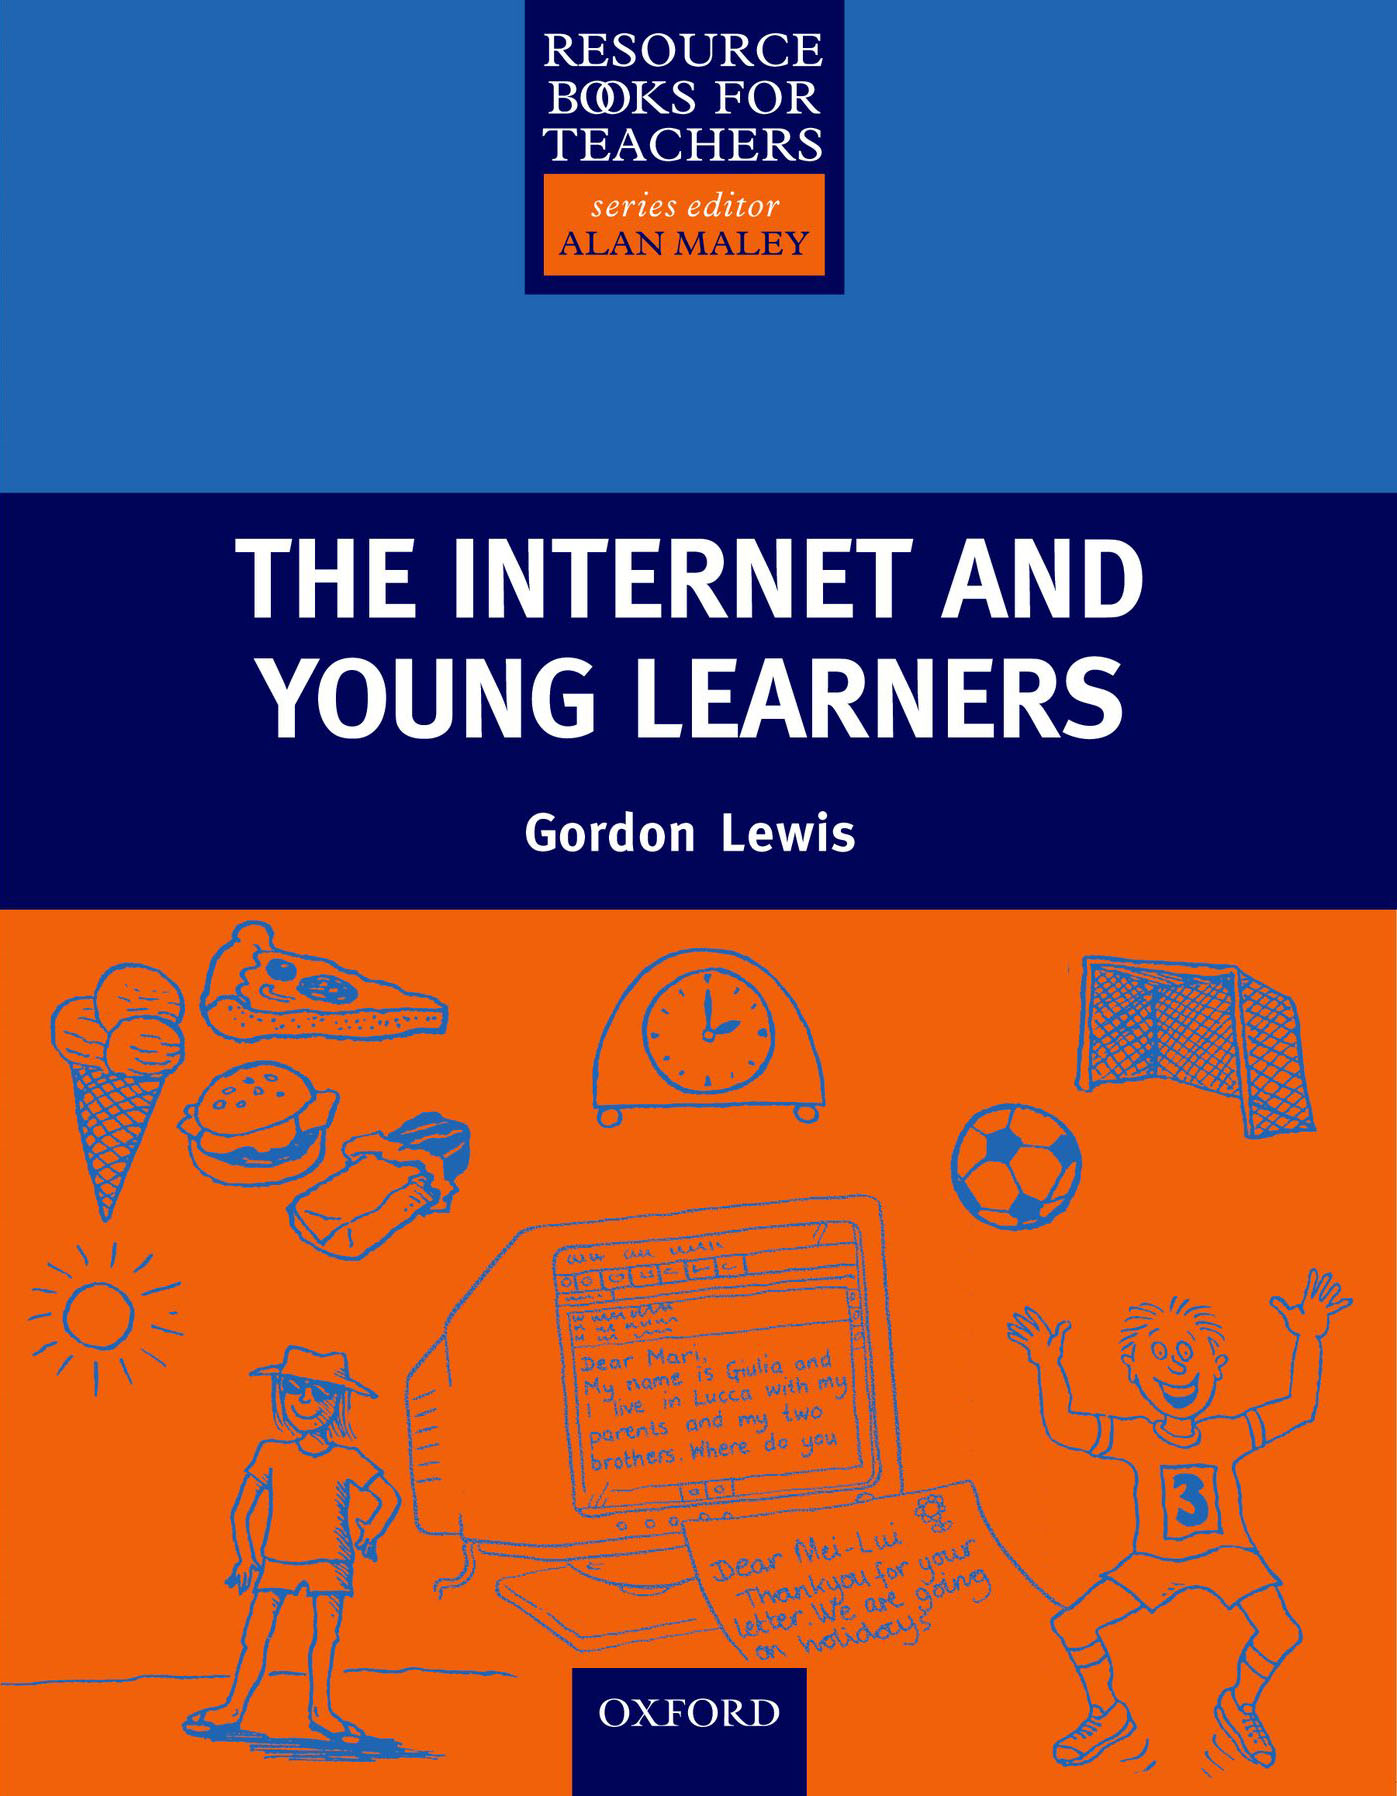 The Internet and Young Learners